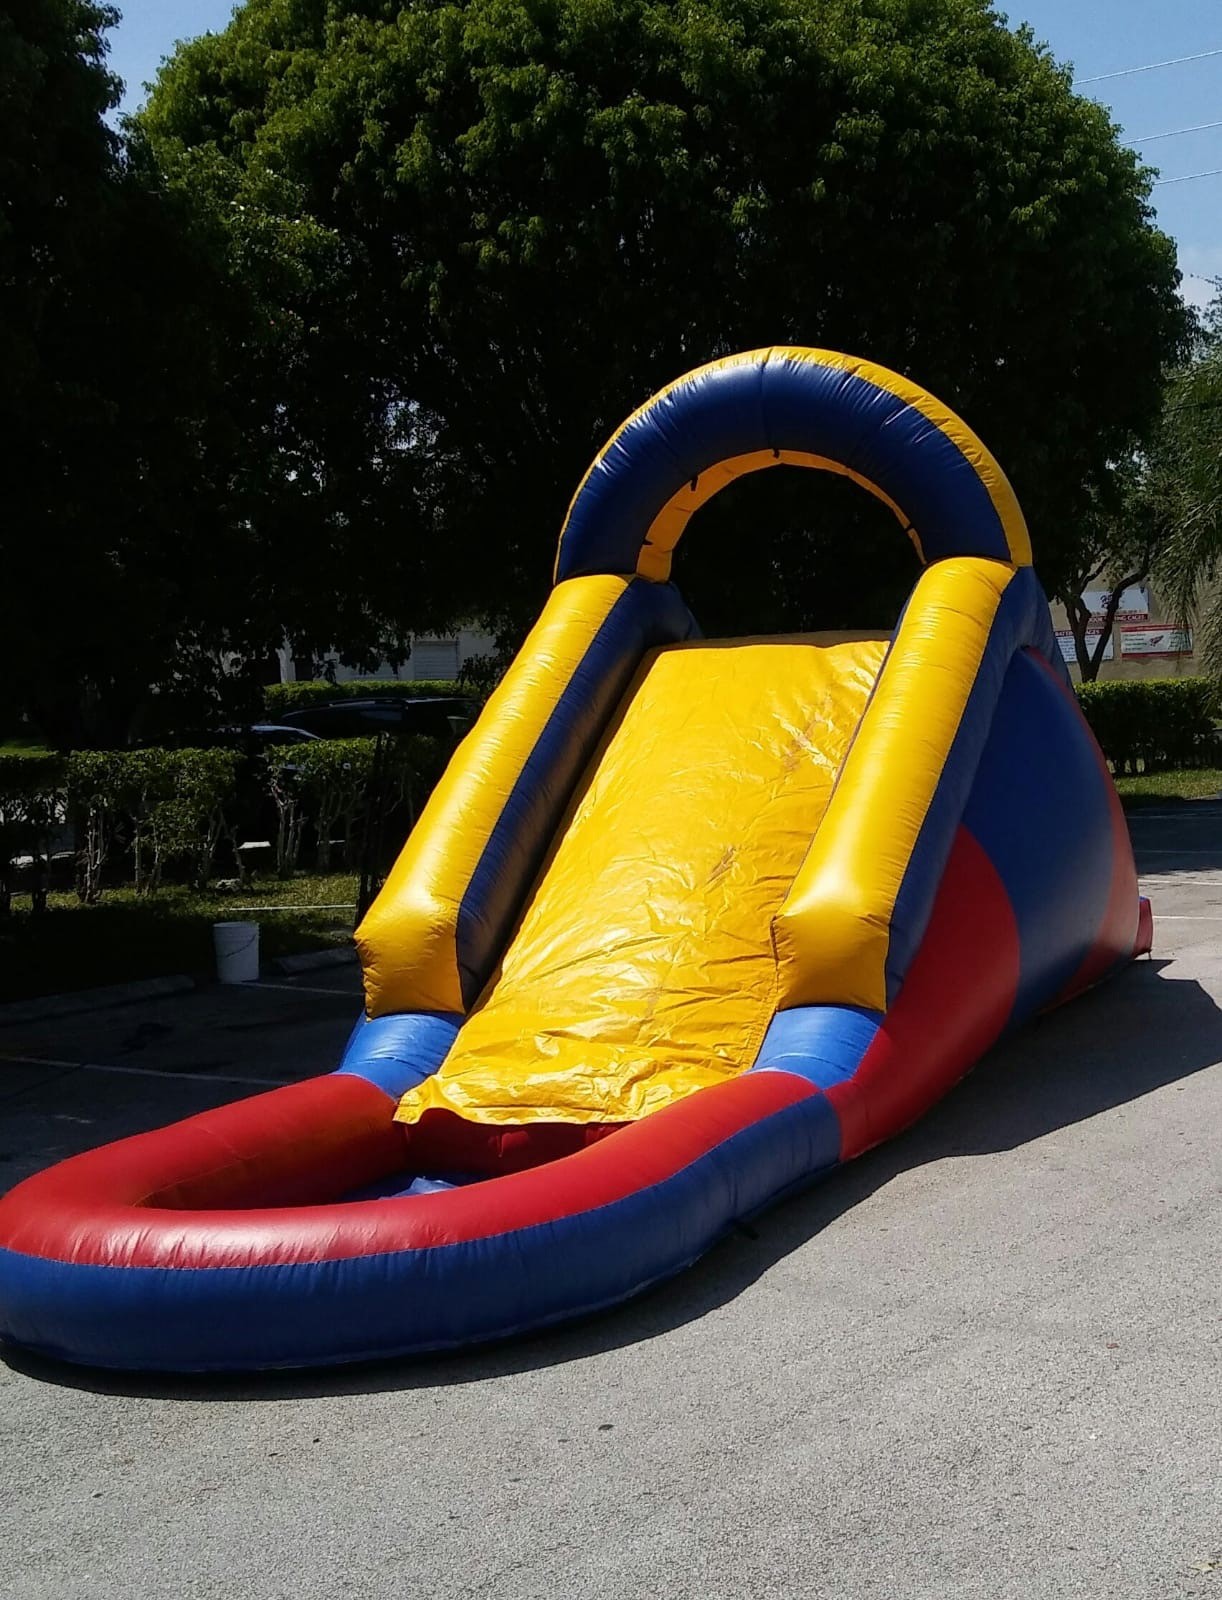 Bounce, Slides, And Other Inflatables